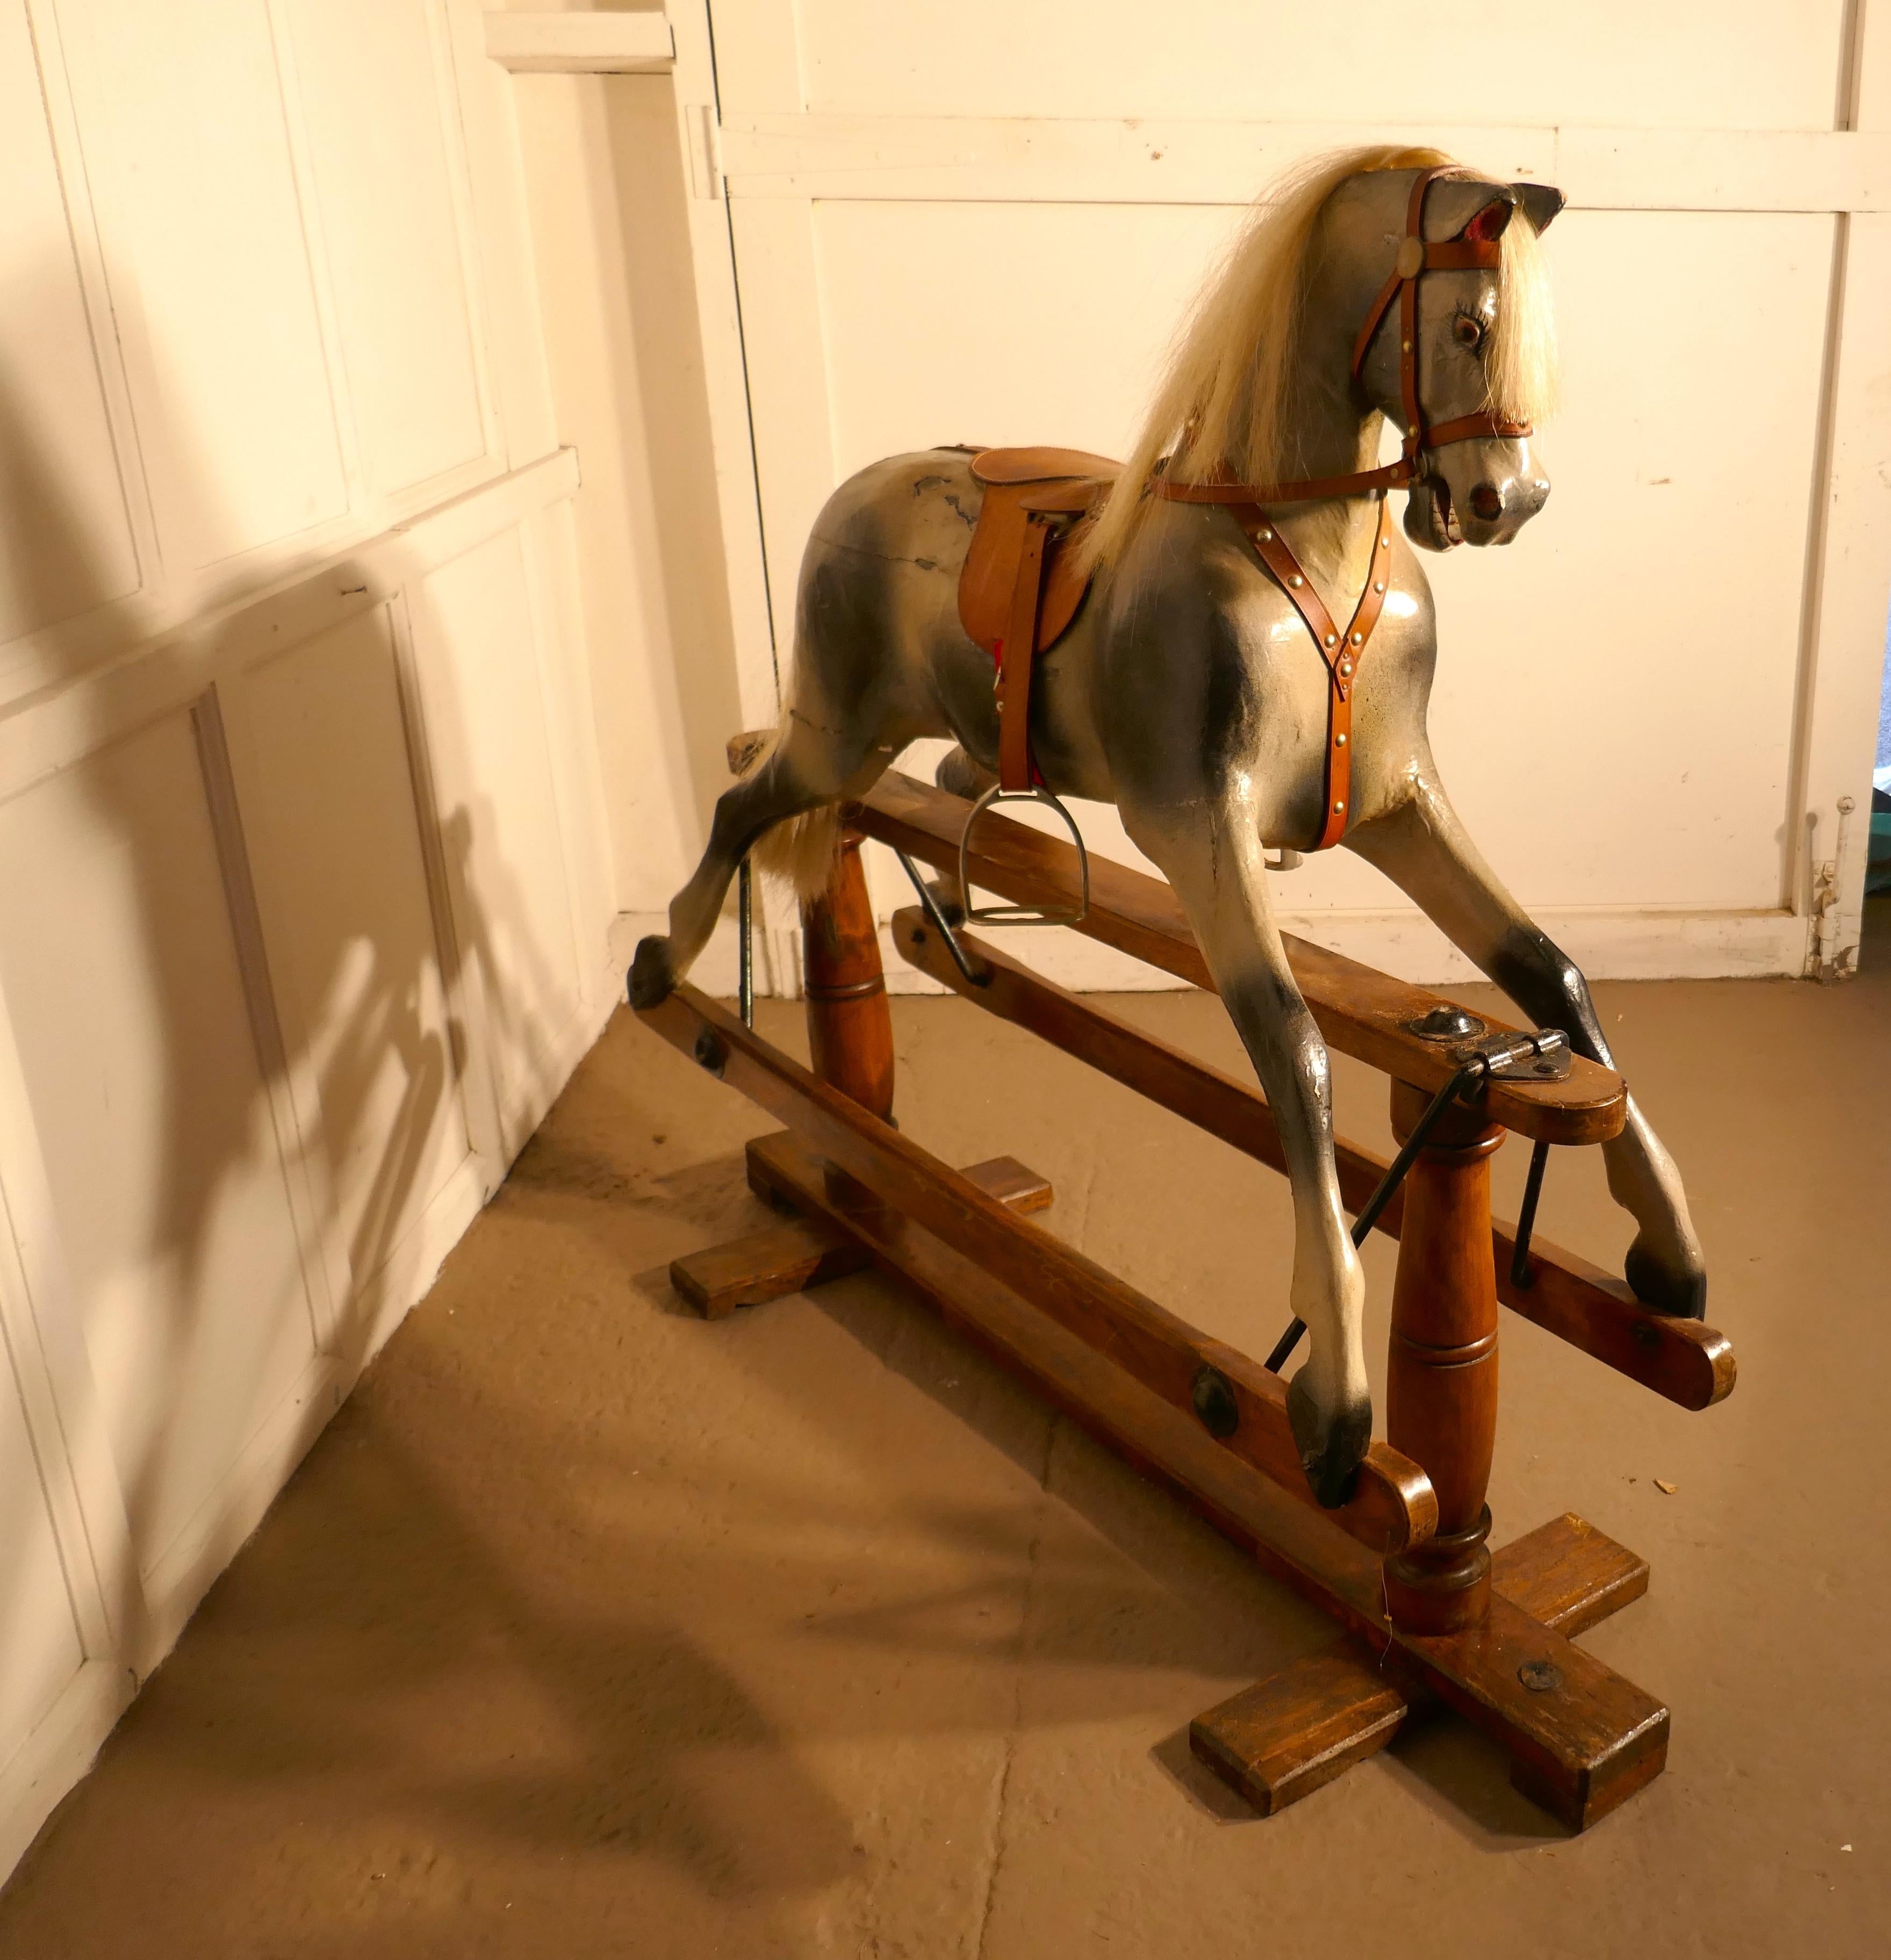 Early 20th century rocking horse by Lines Brothers

A handsome Dapple Grey galloper with Horse Hair mane and tail, he has the Classic open mouthed expression and bright glass eyes
Our Handsome galloper has had some minor restoration, (to keep him